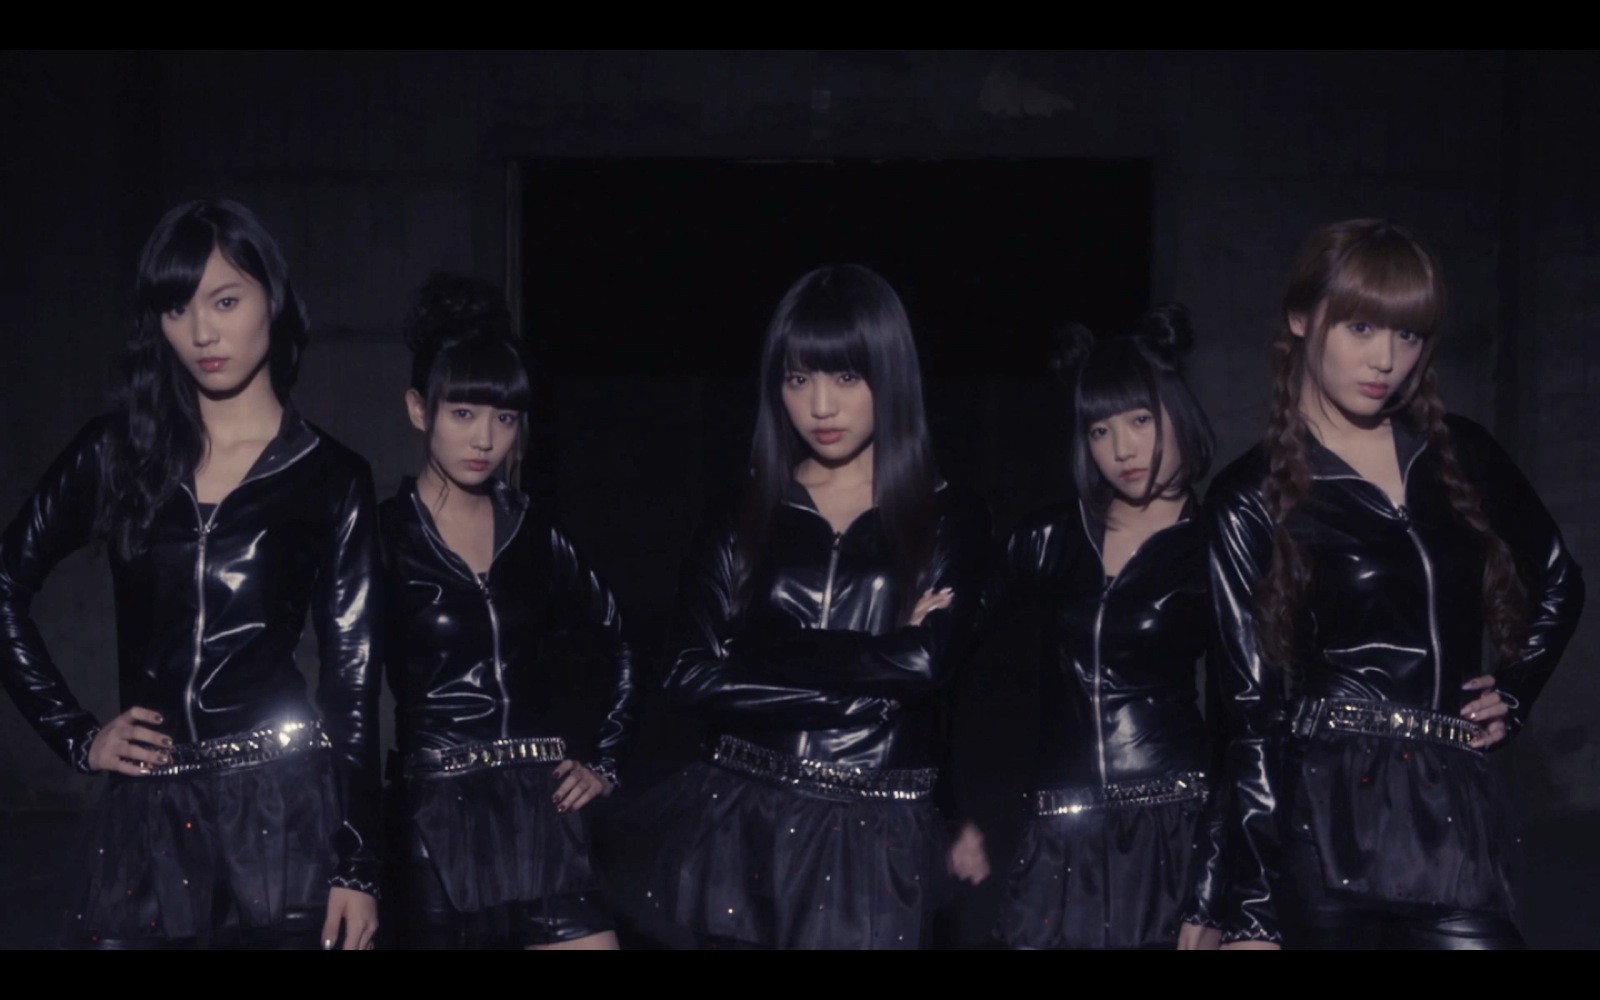 Yumemiru Adolescence Conducts “Stealth Meeting”! MV for the Lead Track off Their Upcoming Album Comes out of the Shadows